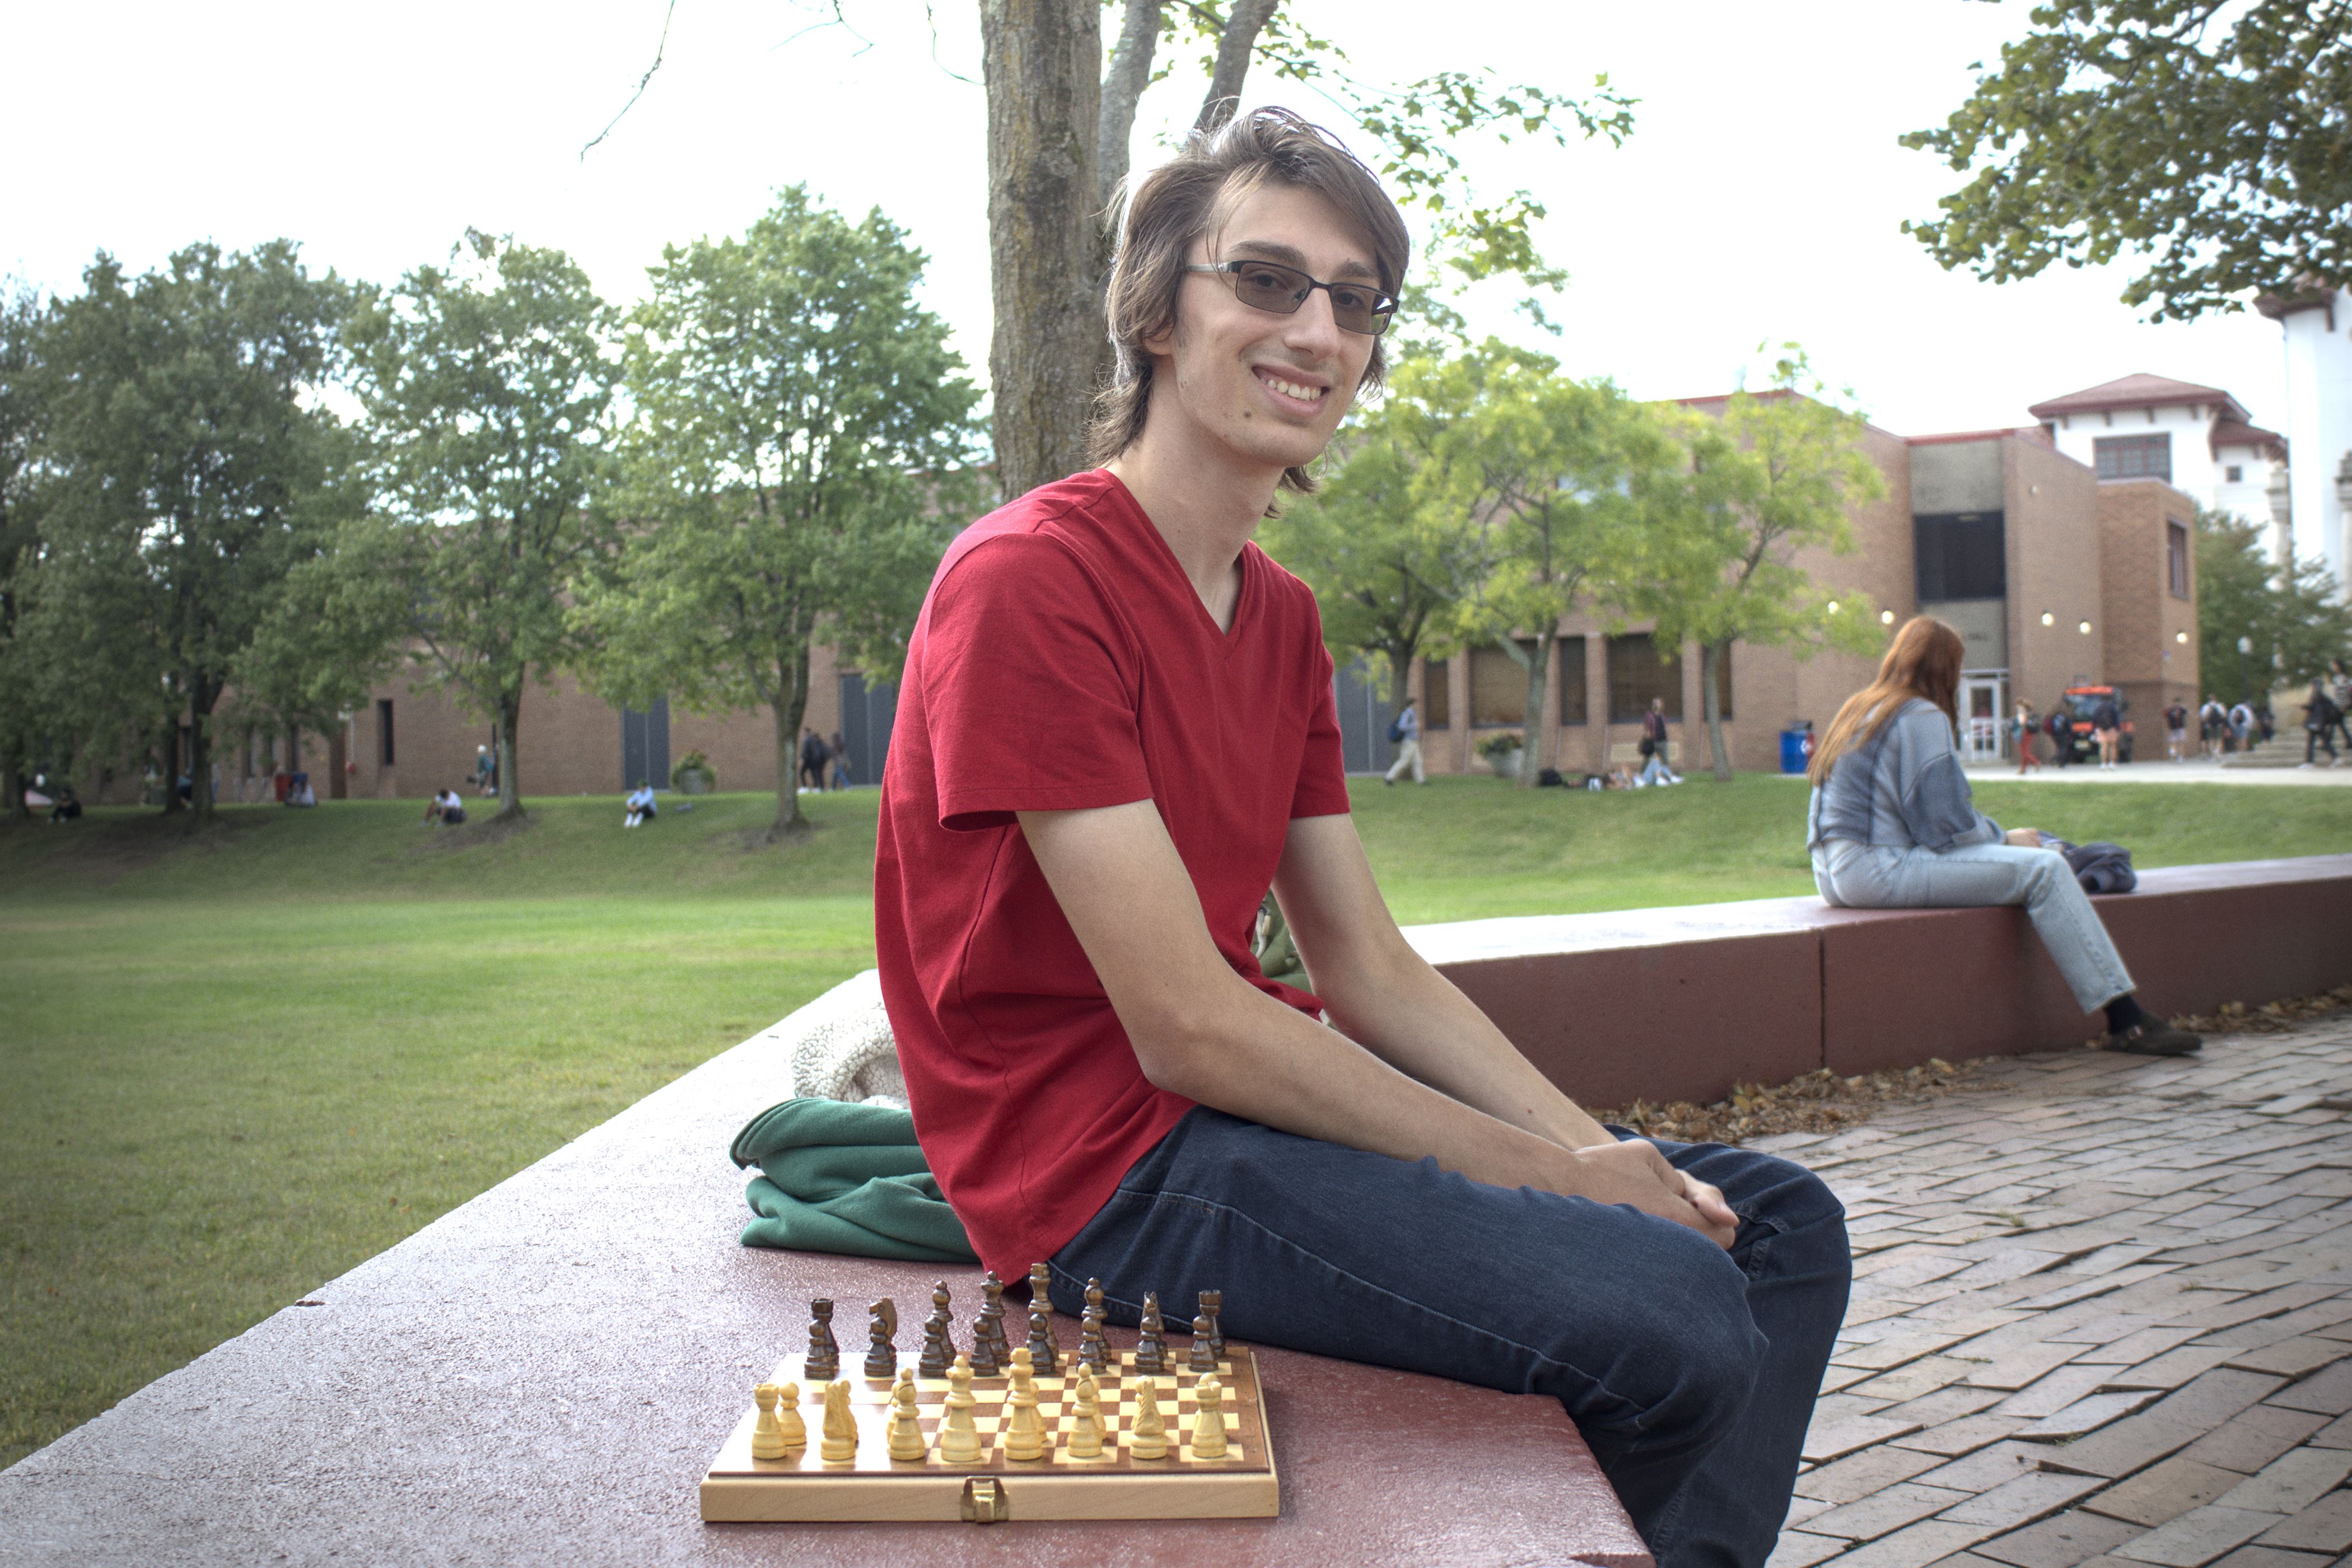 Tall student with long brown hair sits on maroon wall. His glasses are tinted, but do not obscure his eyes. Student is wearing a red t-shirt with blue jeans and is behind a portable chess set.